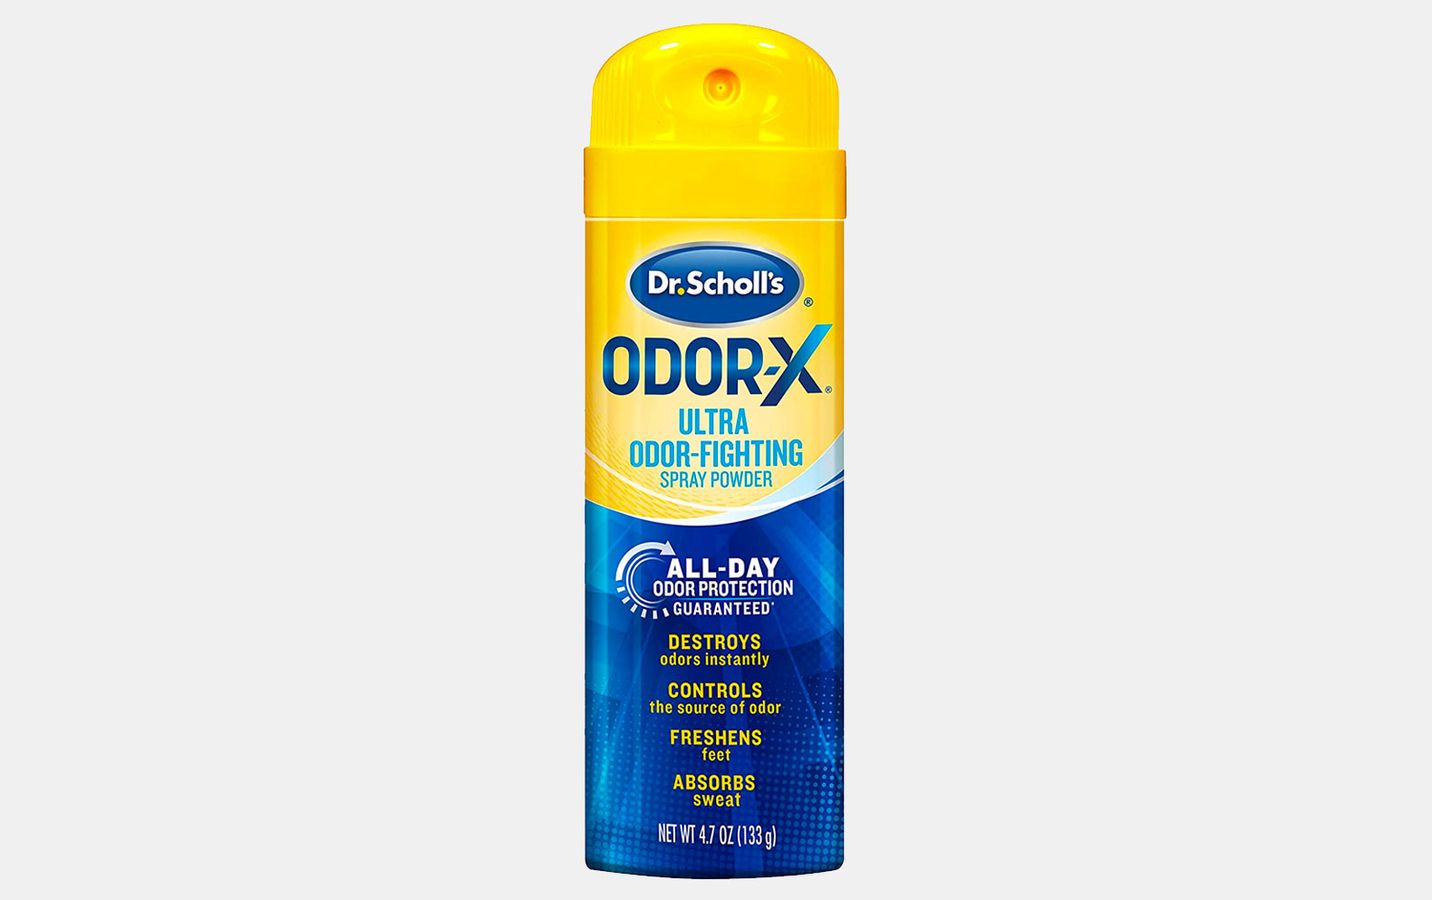 Dr. Scholl’s Odor-X product image of a blue and yellow can.